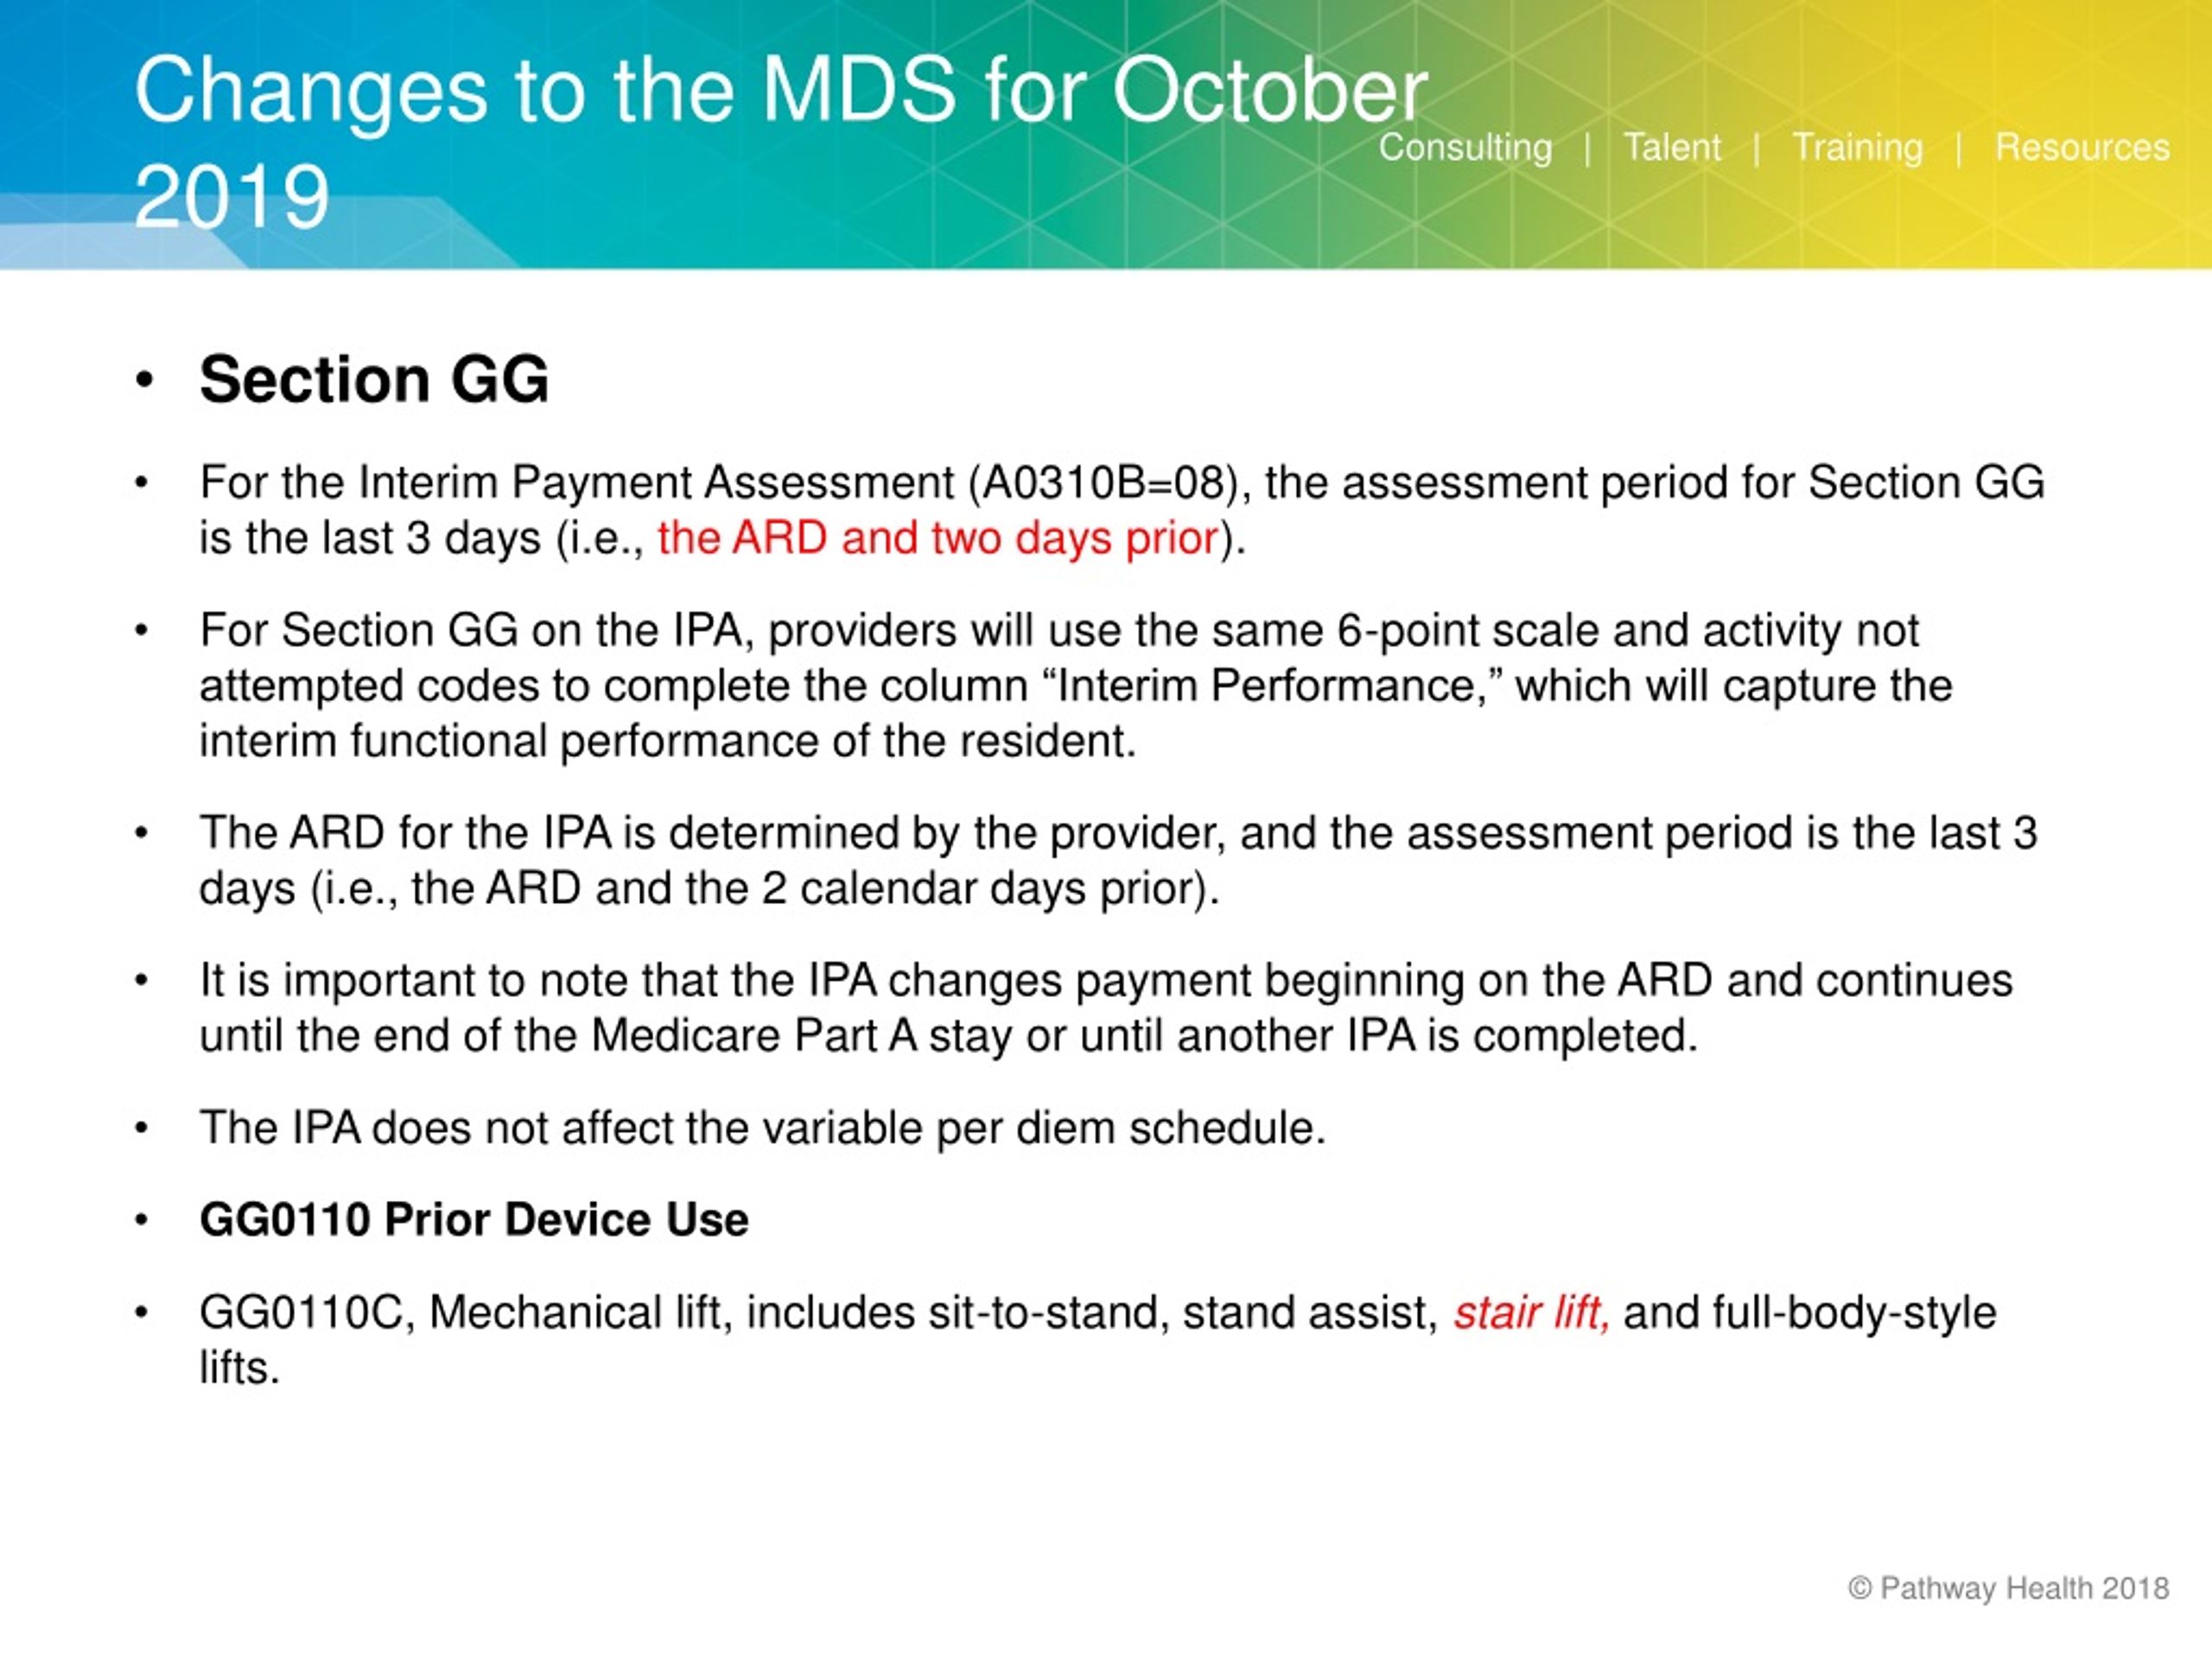 PPT Review Other MDS Changes PowerPoint Presentation, free download